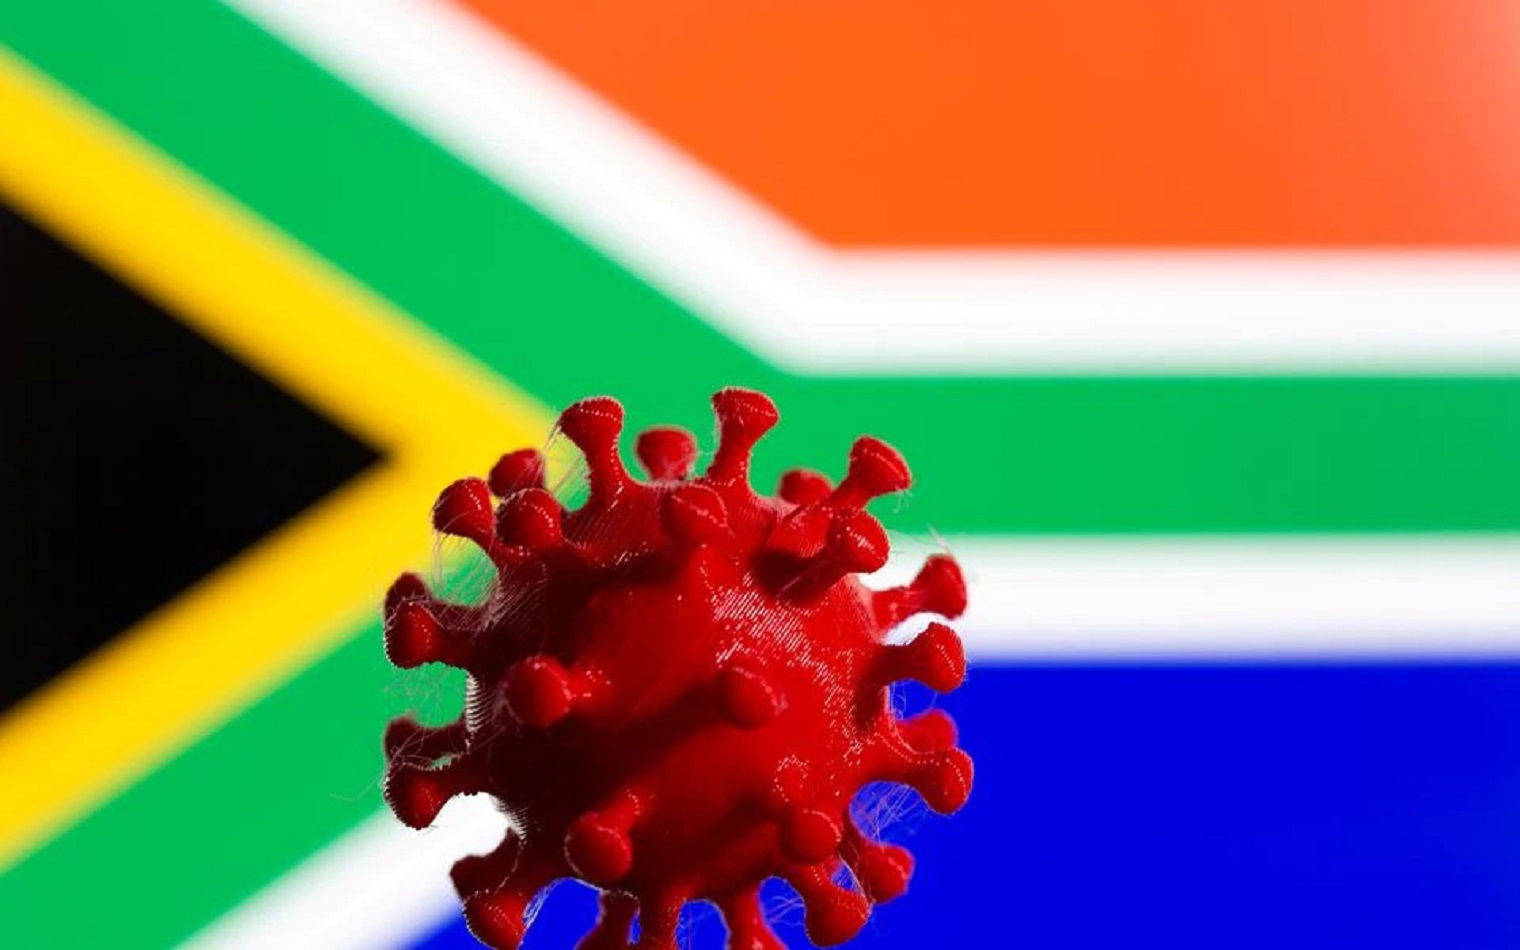 Covid Propaganda – The South African Variant